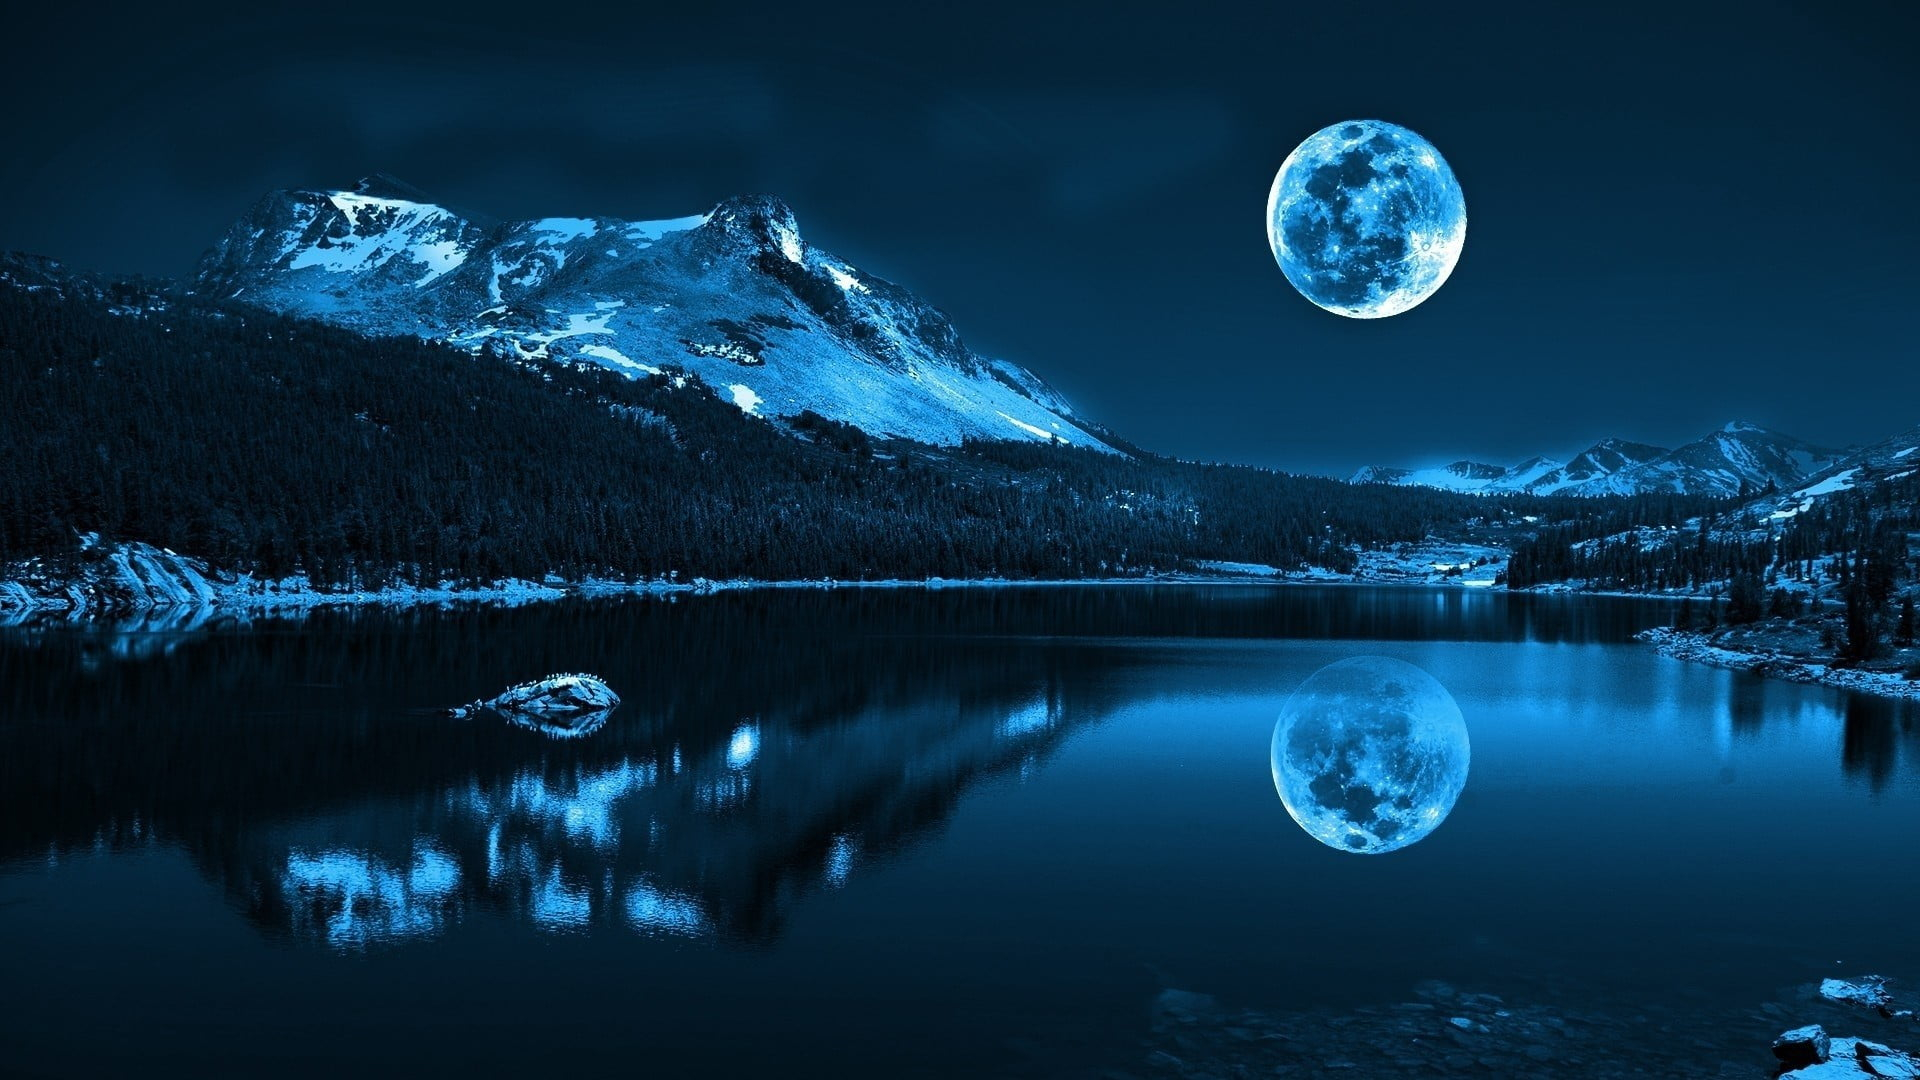 Reflection of snowy mountain on body of water under full-moon wallpaper